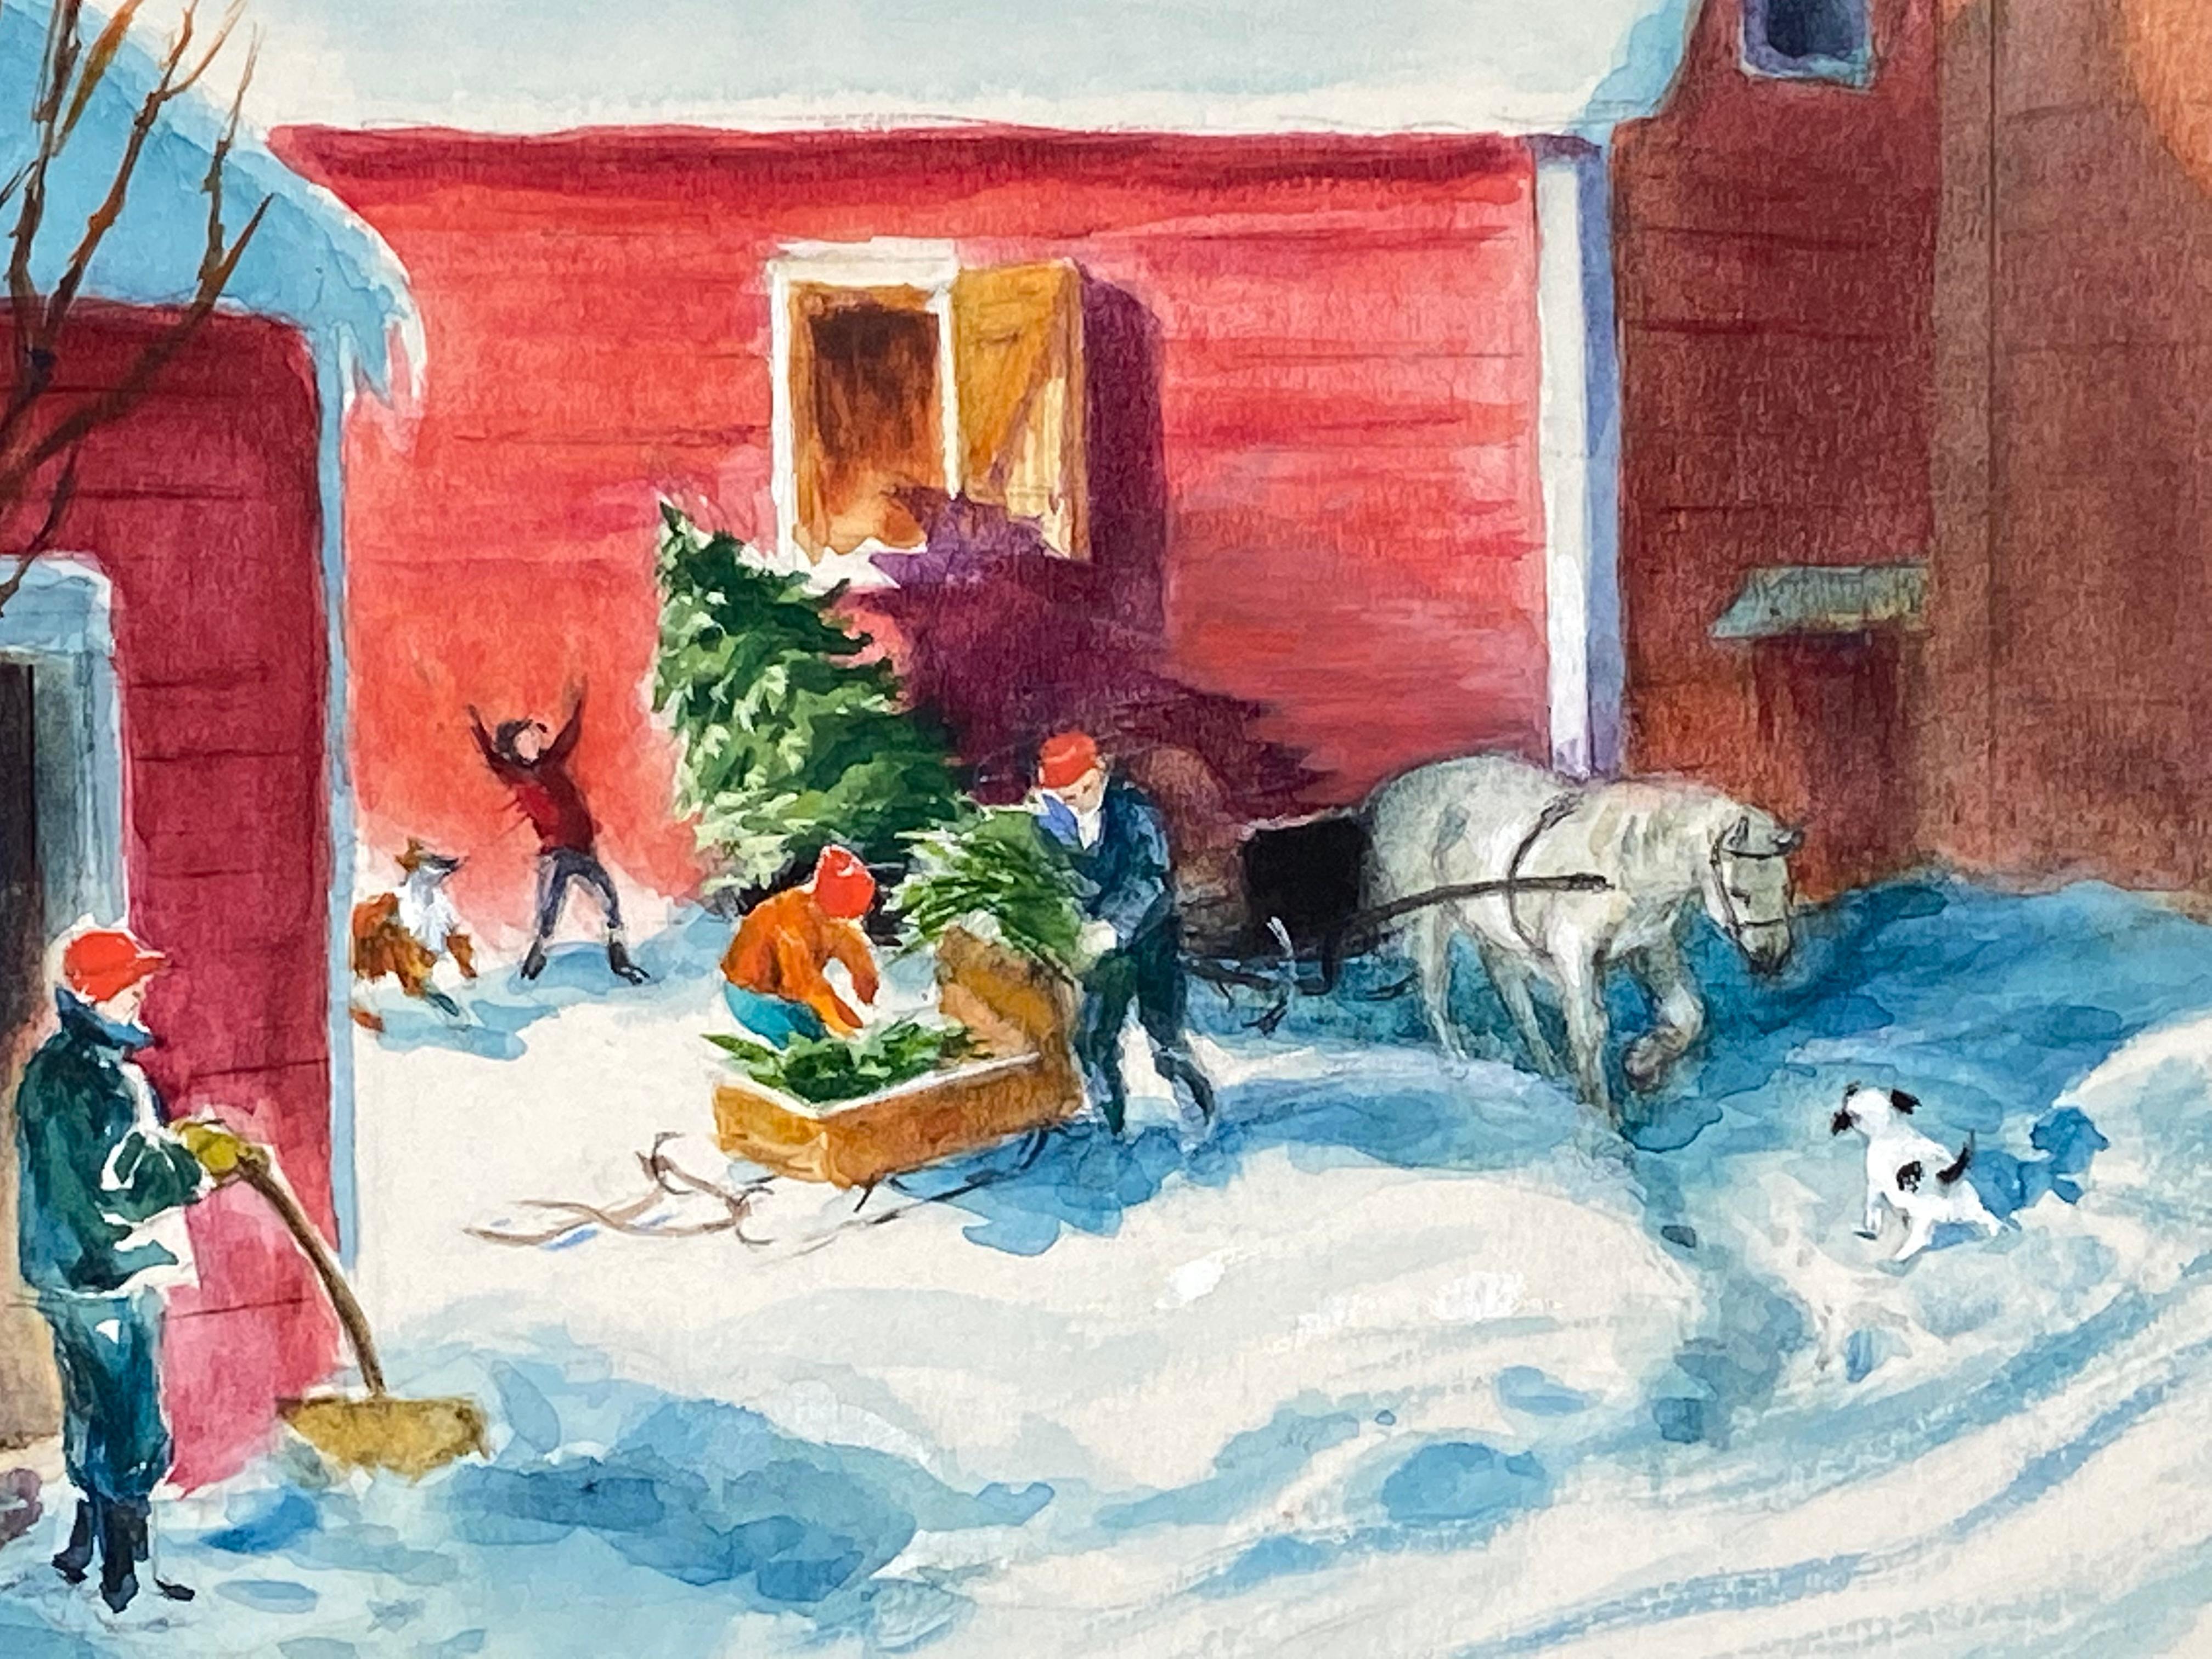 “Holiday Season” - Art by Louise Clasper Rumely